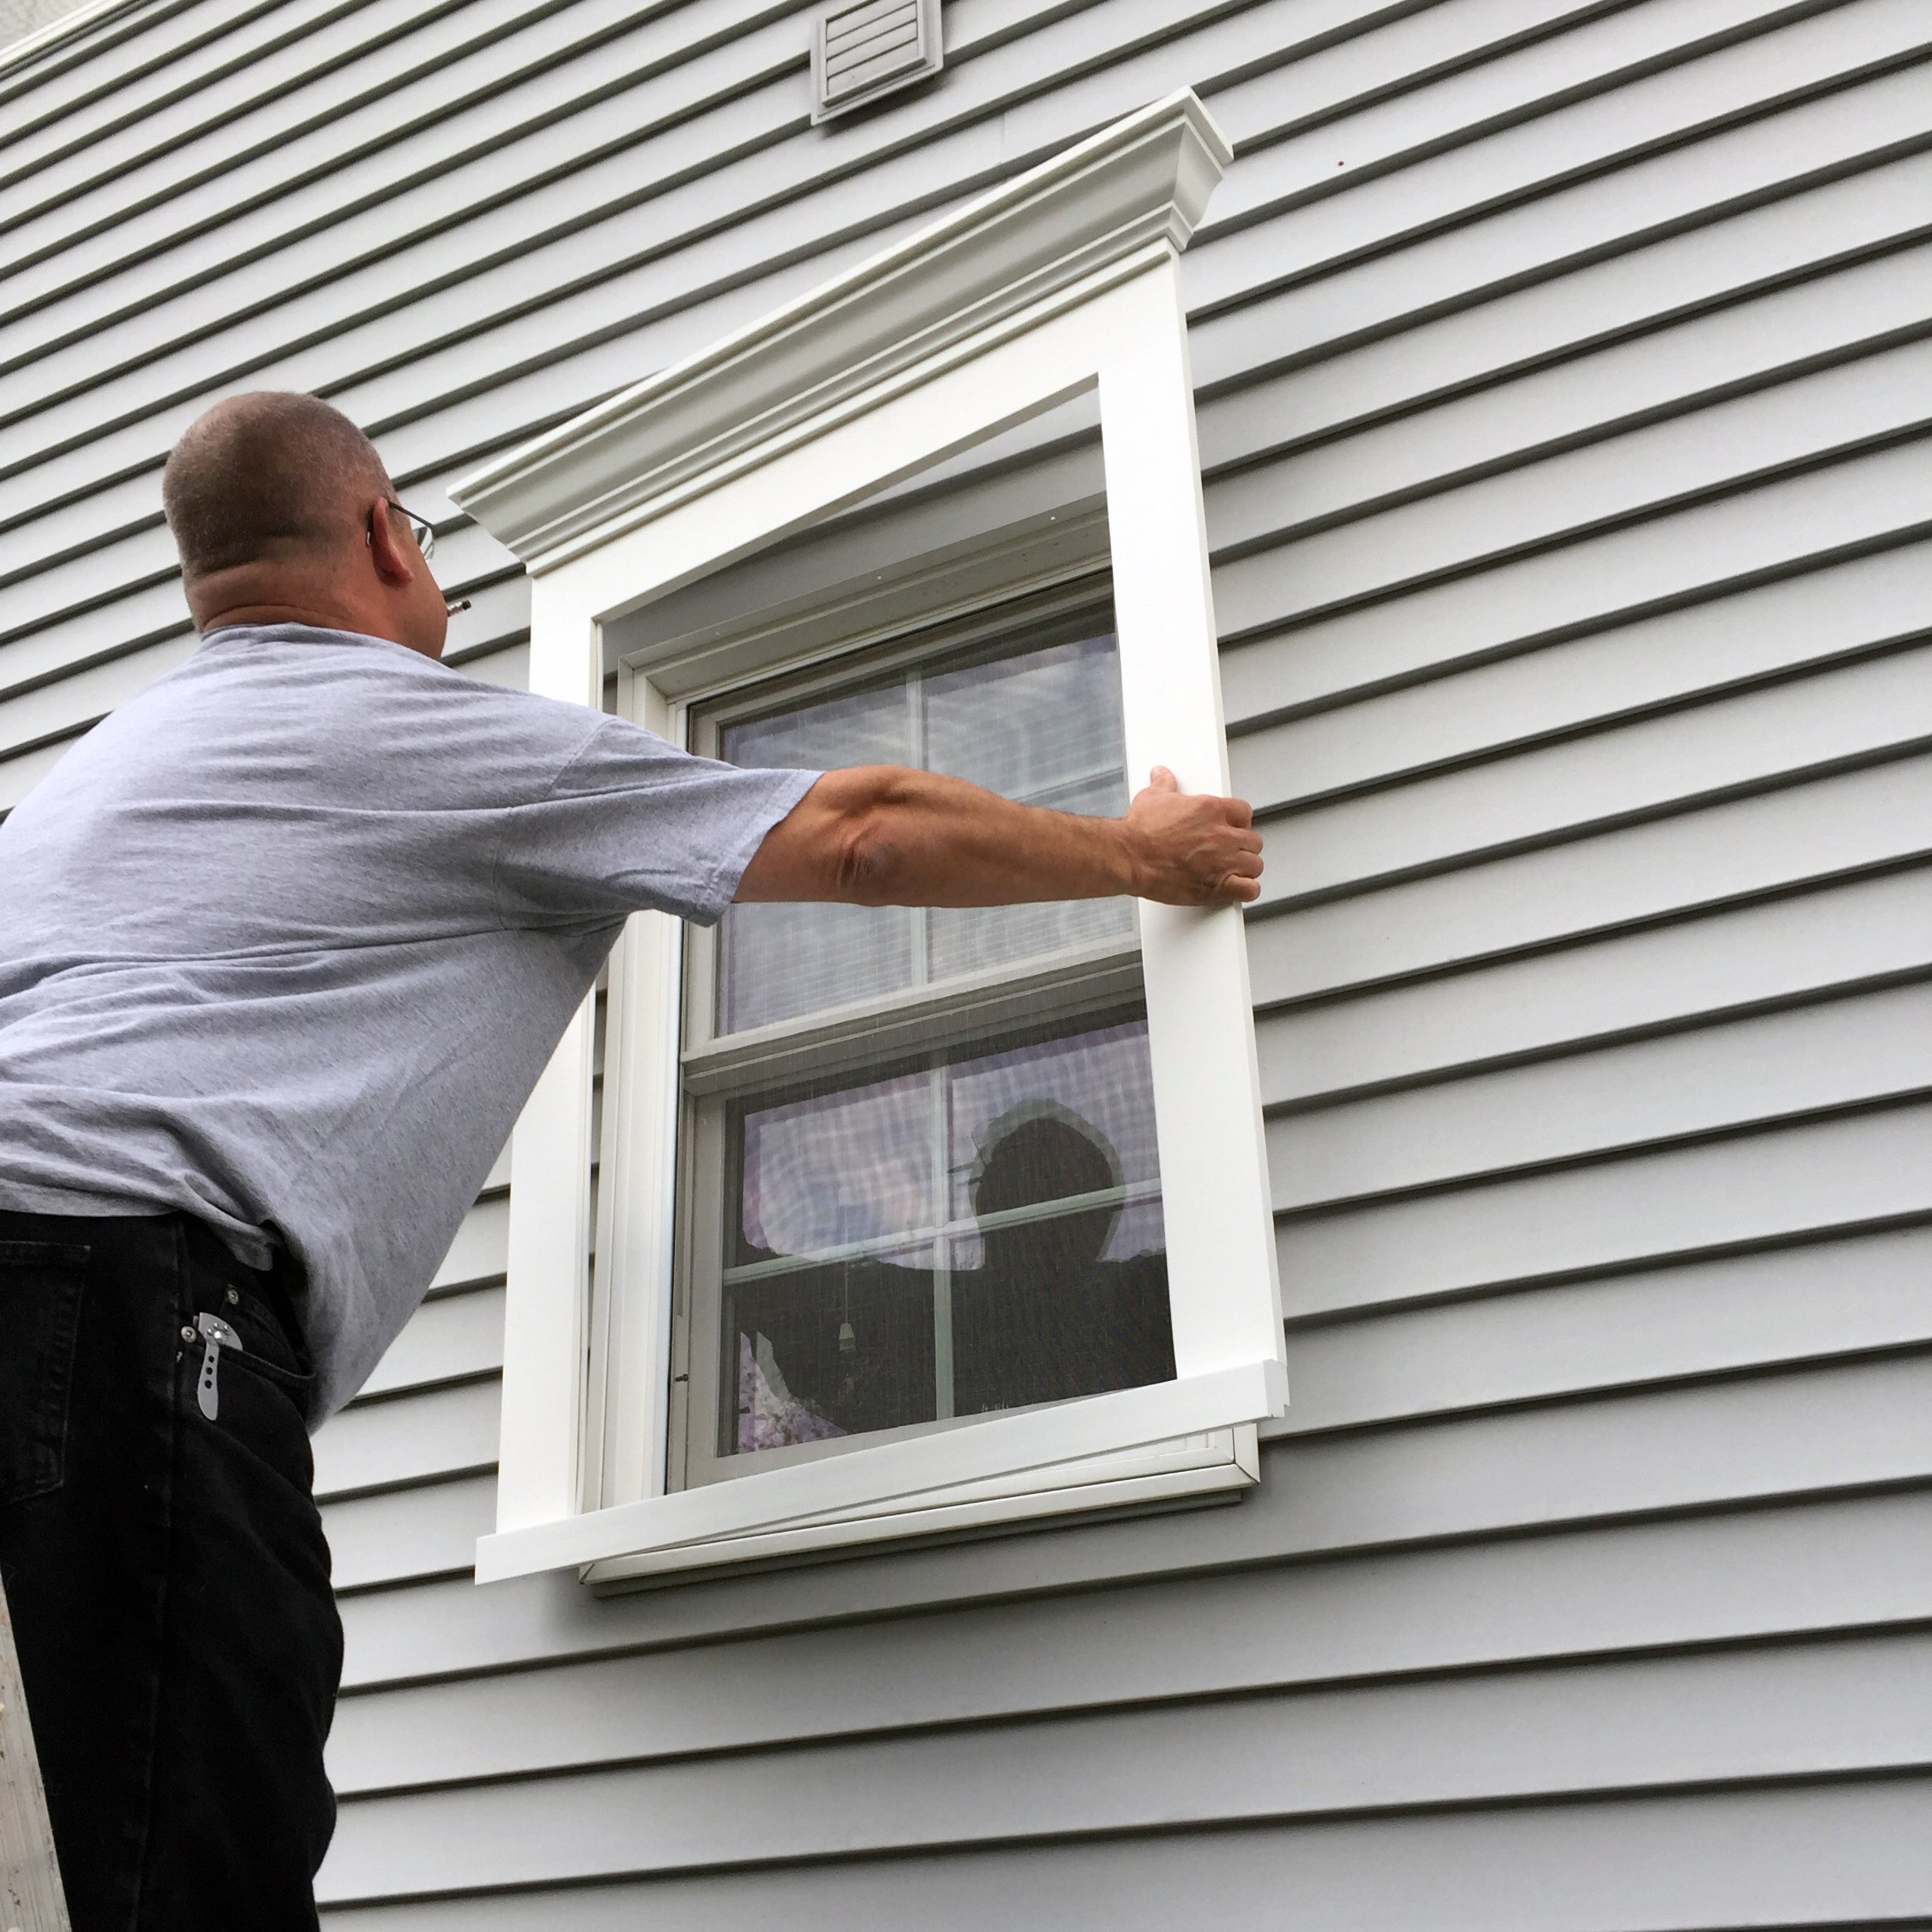 removing the existing window trim